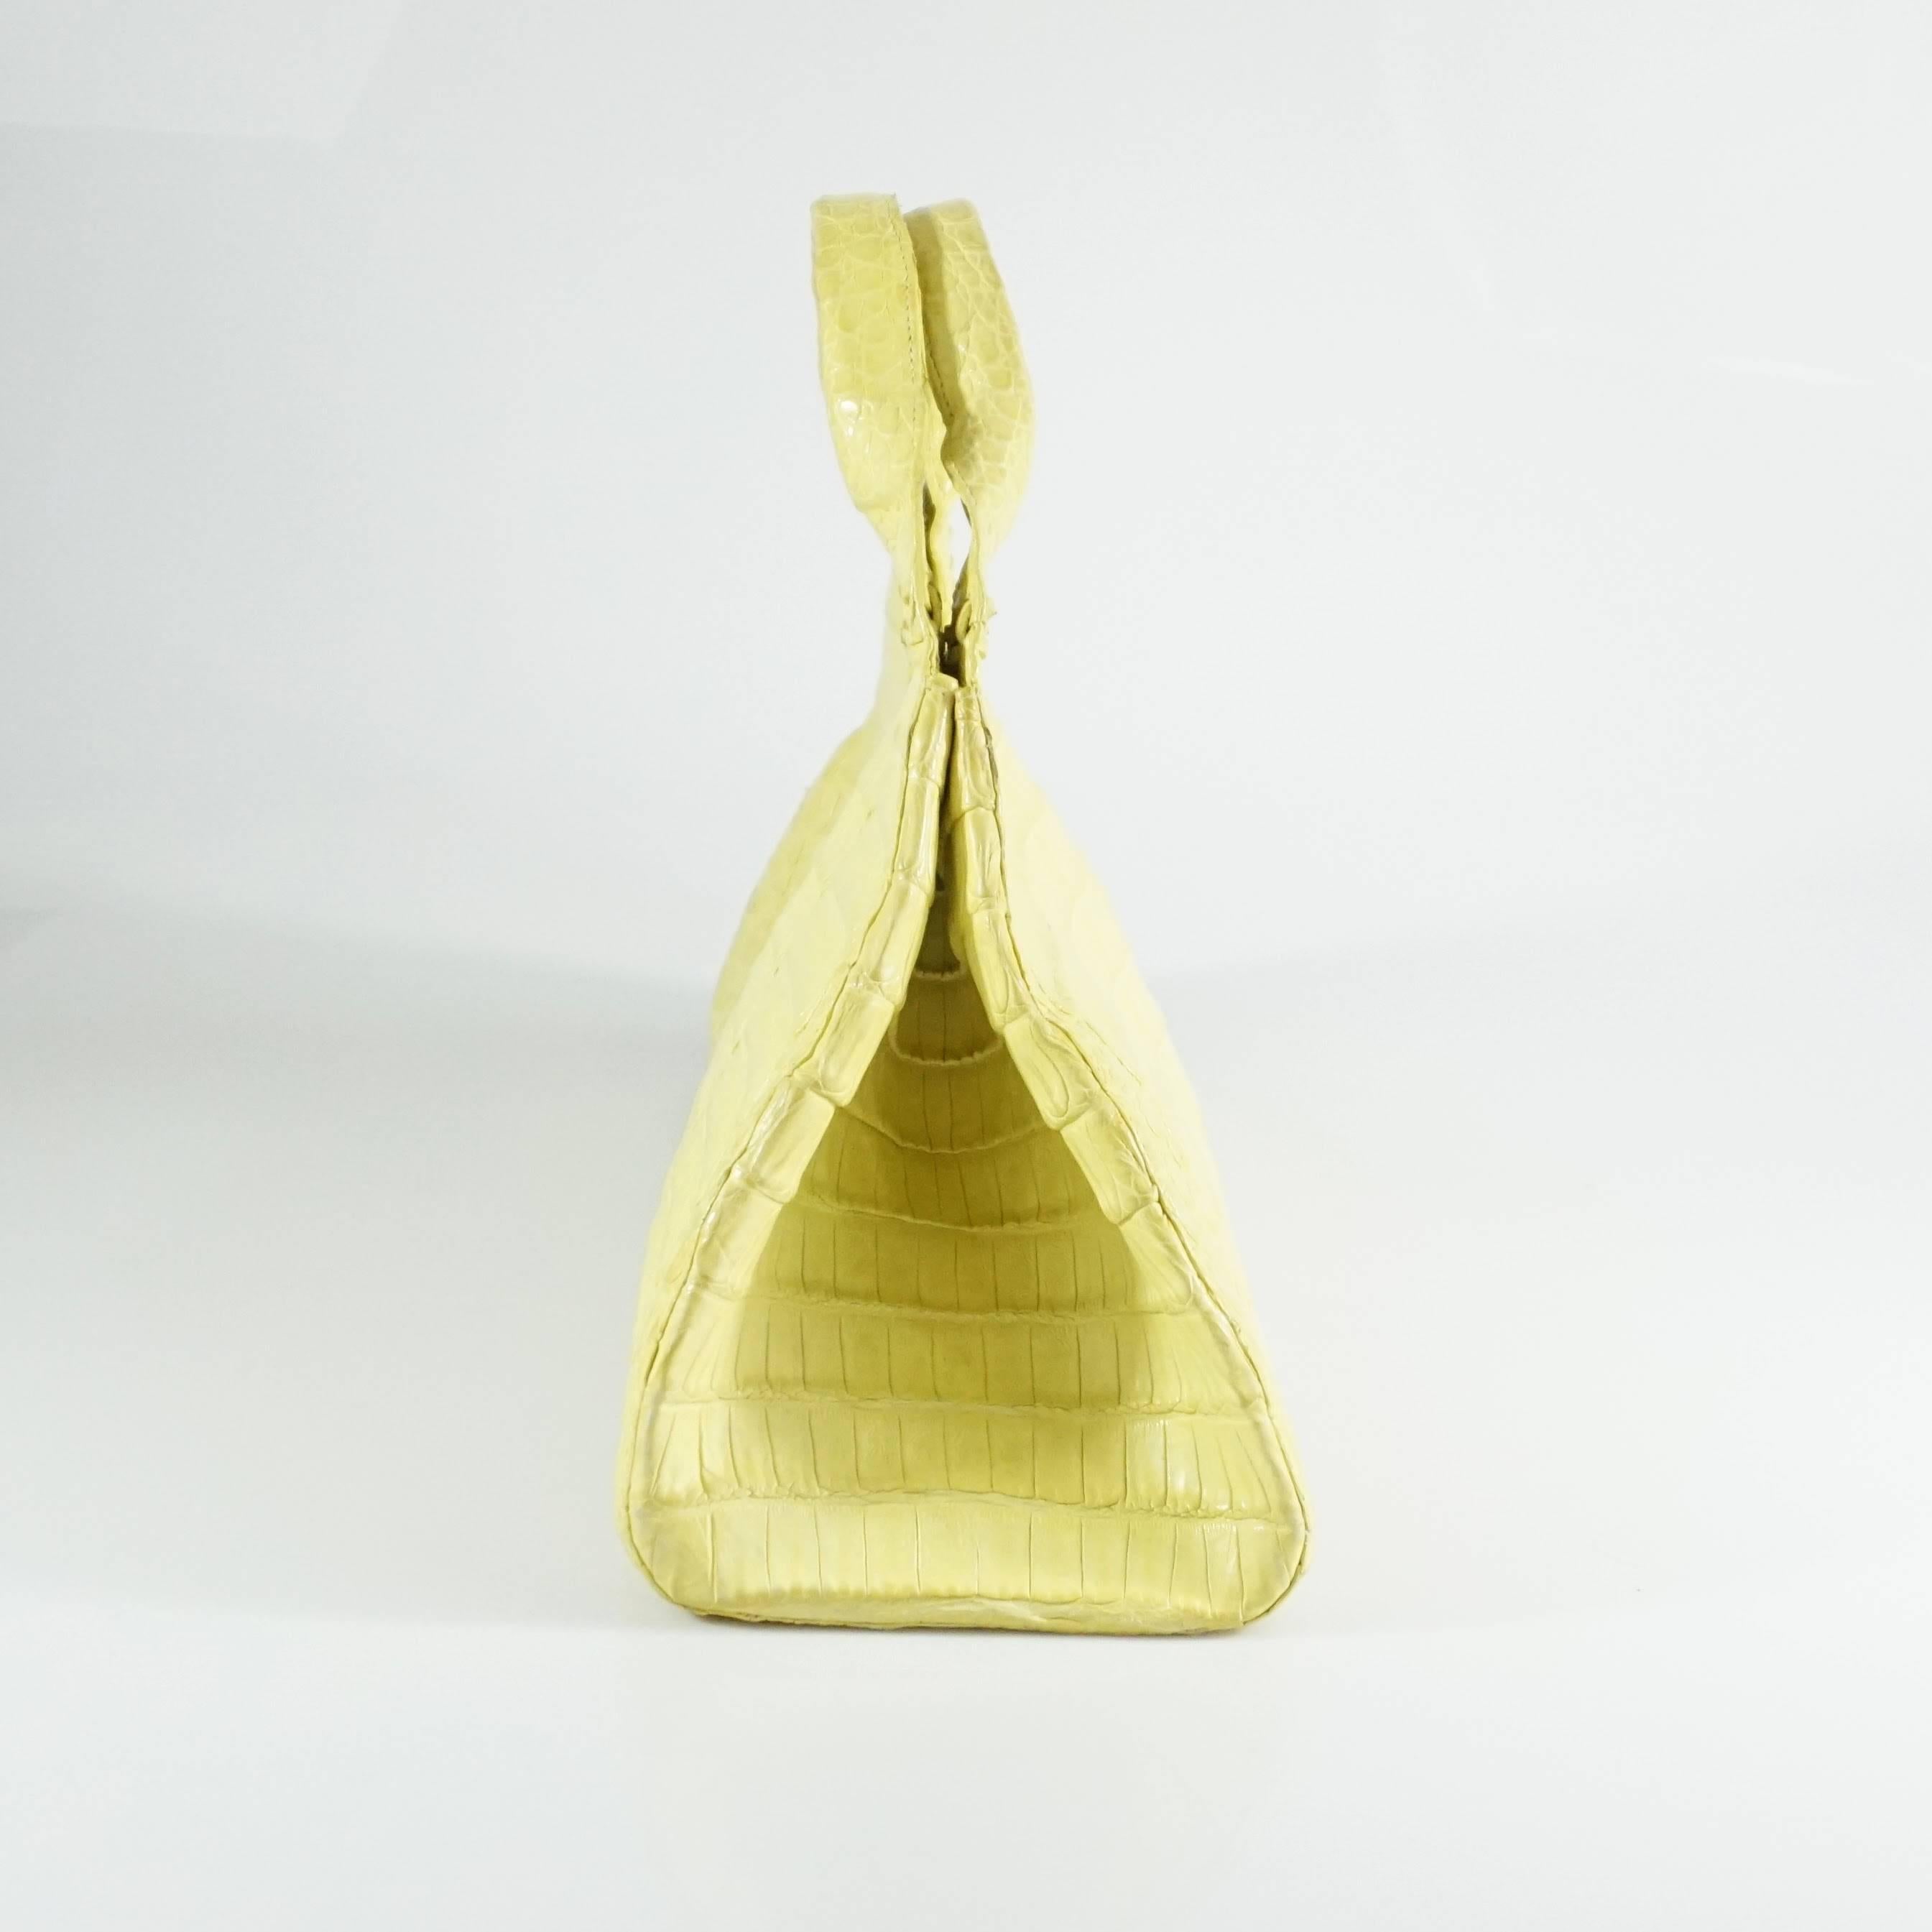 This Nancy Gonzalez yellow crocodile bag features a magnetic clasp, suede lining, 3 interior pockets, and comes with a duster. The bag is in good condition with some small markings and a couple areas where the color has chipped off. 